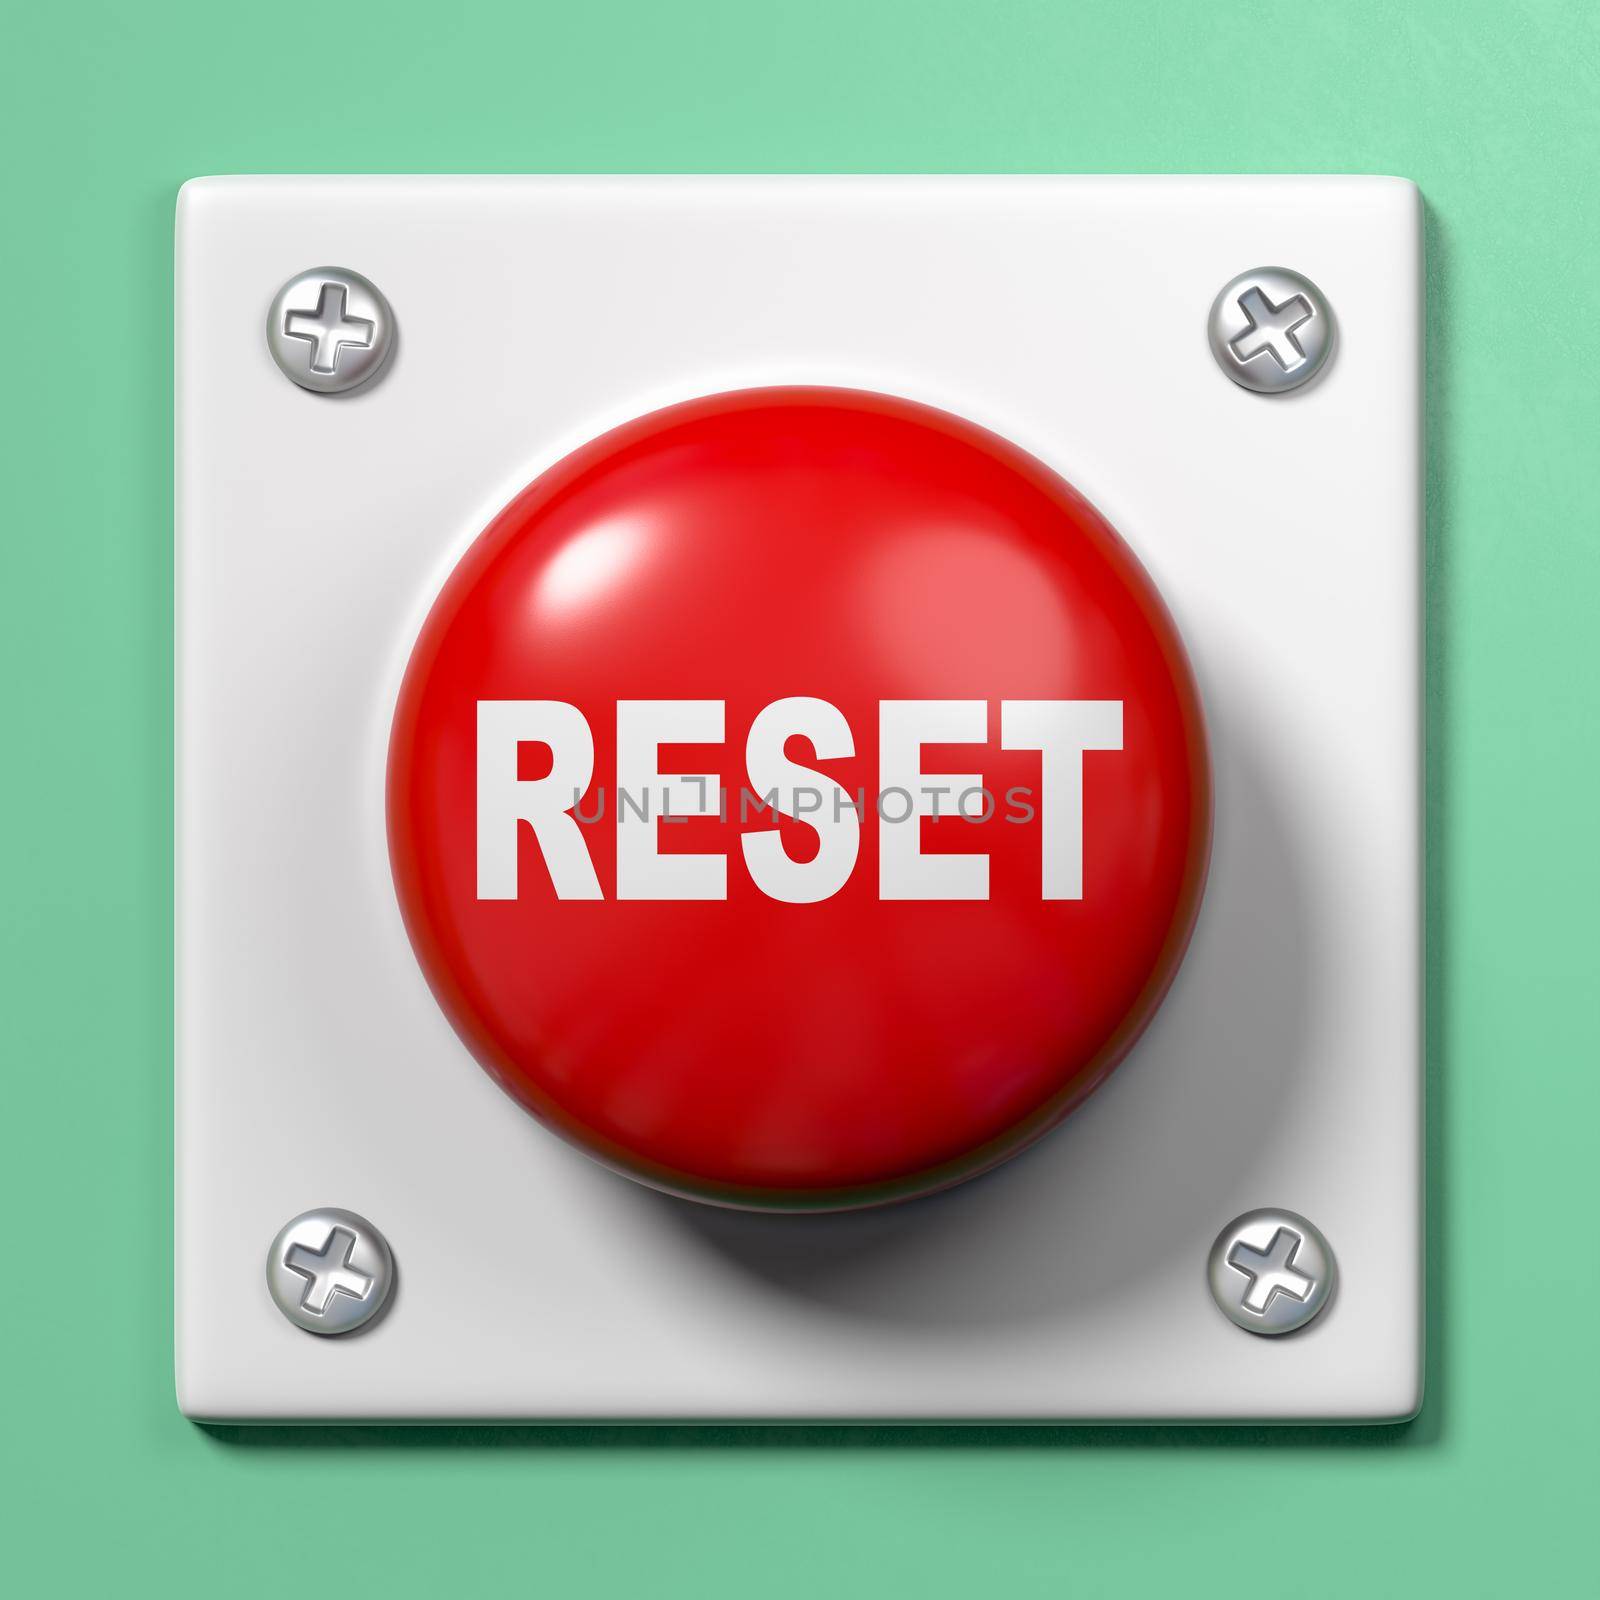 Red Button with Reset Text Against a Green Background 3D Rendering Illustration